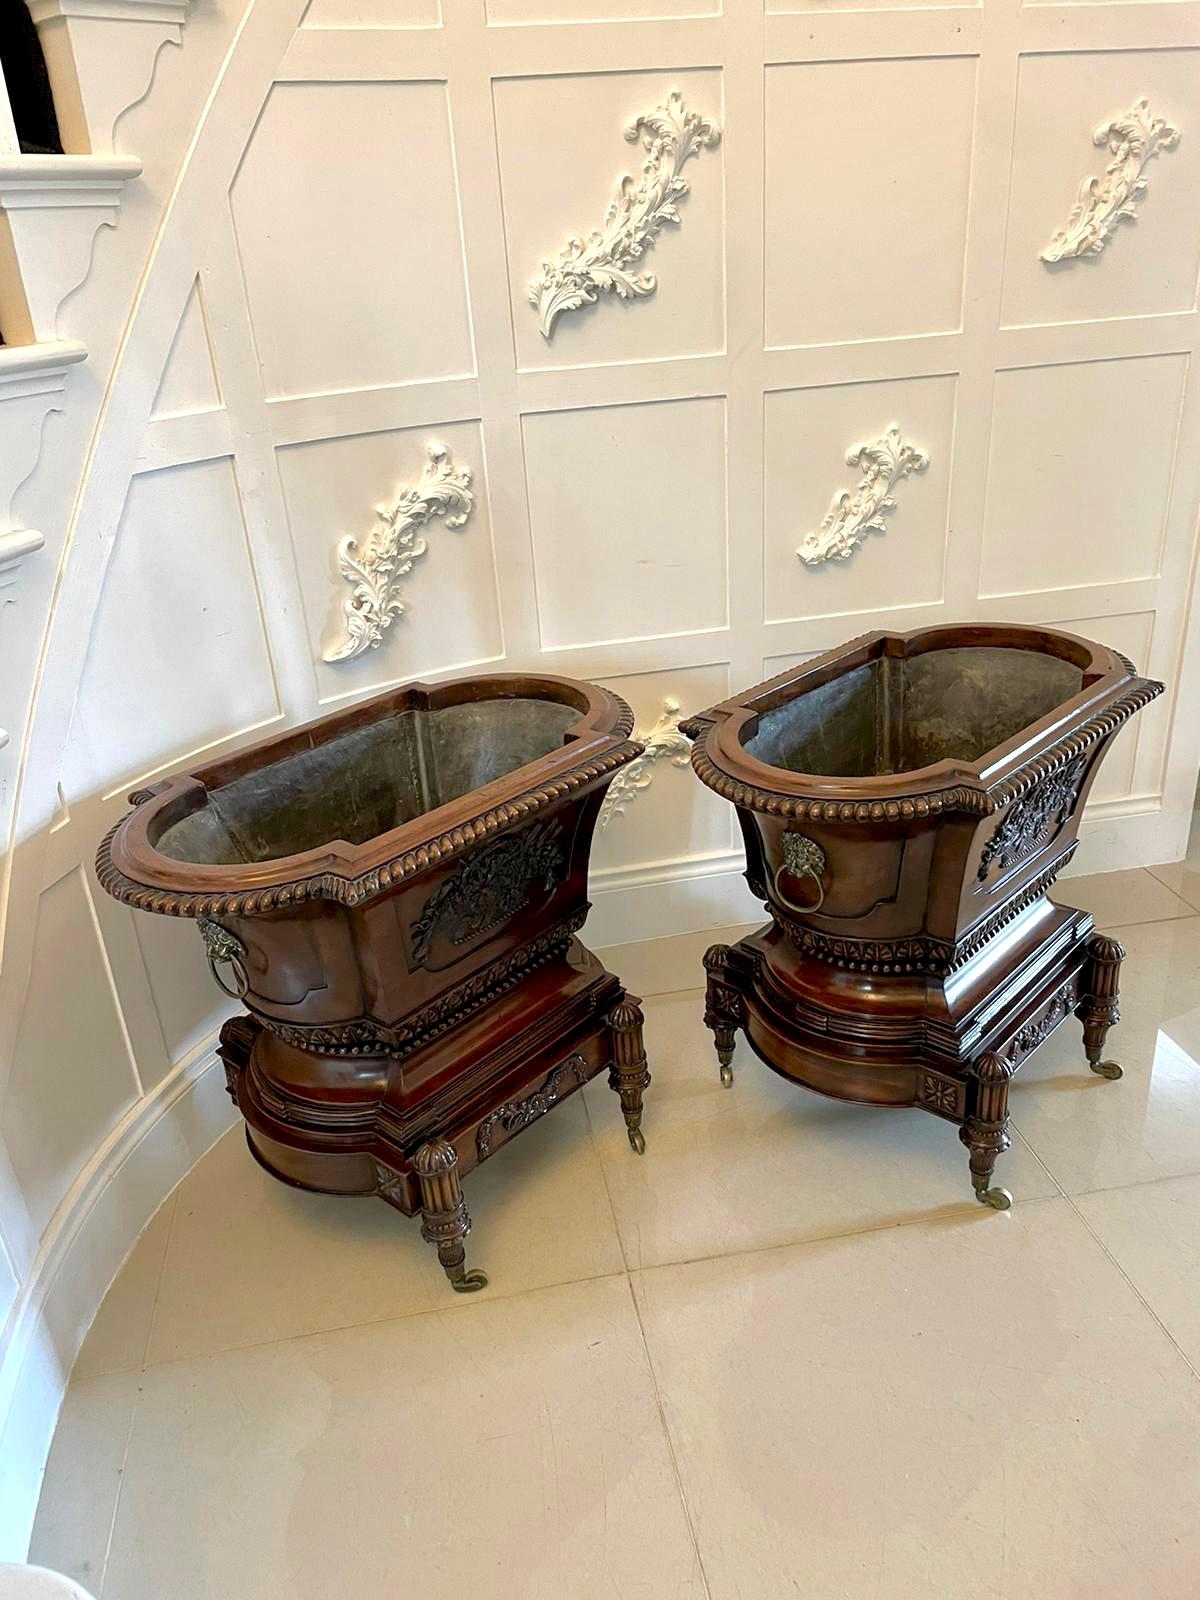 Outstanding quality pair of antique Victorian freestanding carved mahogany wine coolers
having opened tops with a carved moulded edge, the insides boating the original lead lining. Incredible quality carved mahogany panels with baskets of flowers,